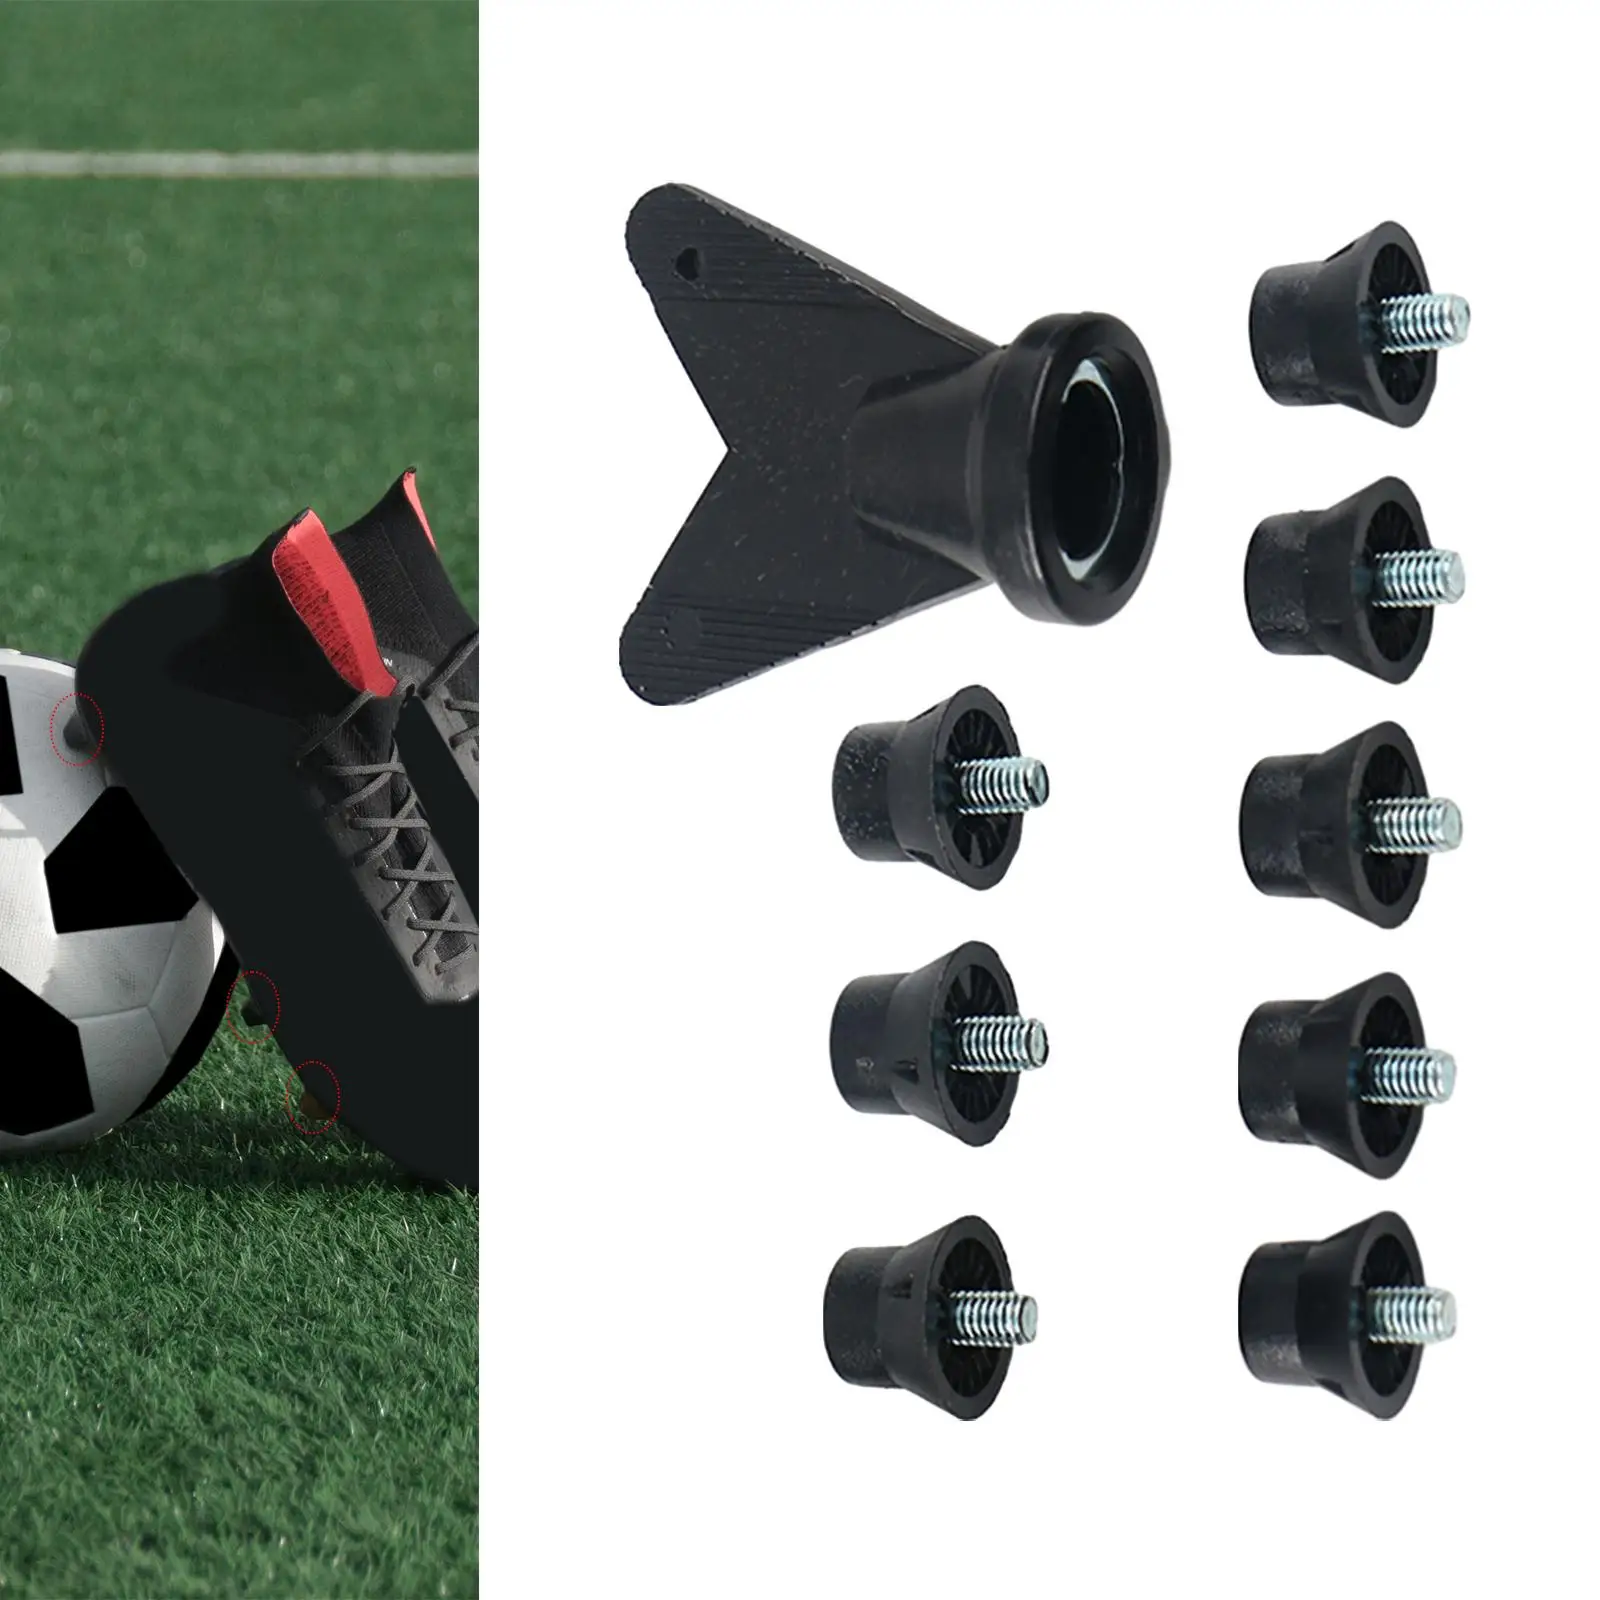 12x Rugby Studs Anti Slip Portable Football Boot Studs Soccer Shoe Spikes for Athletic Sneakers Training Indoor Outdoor Sports